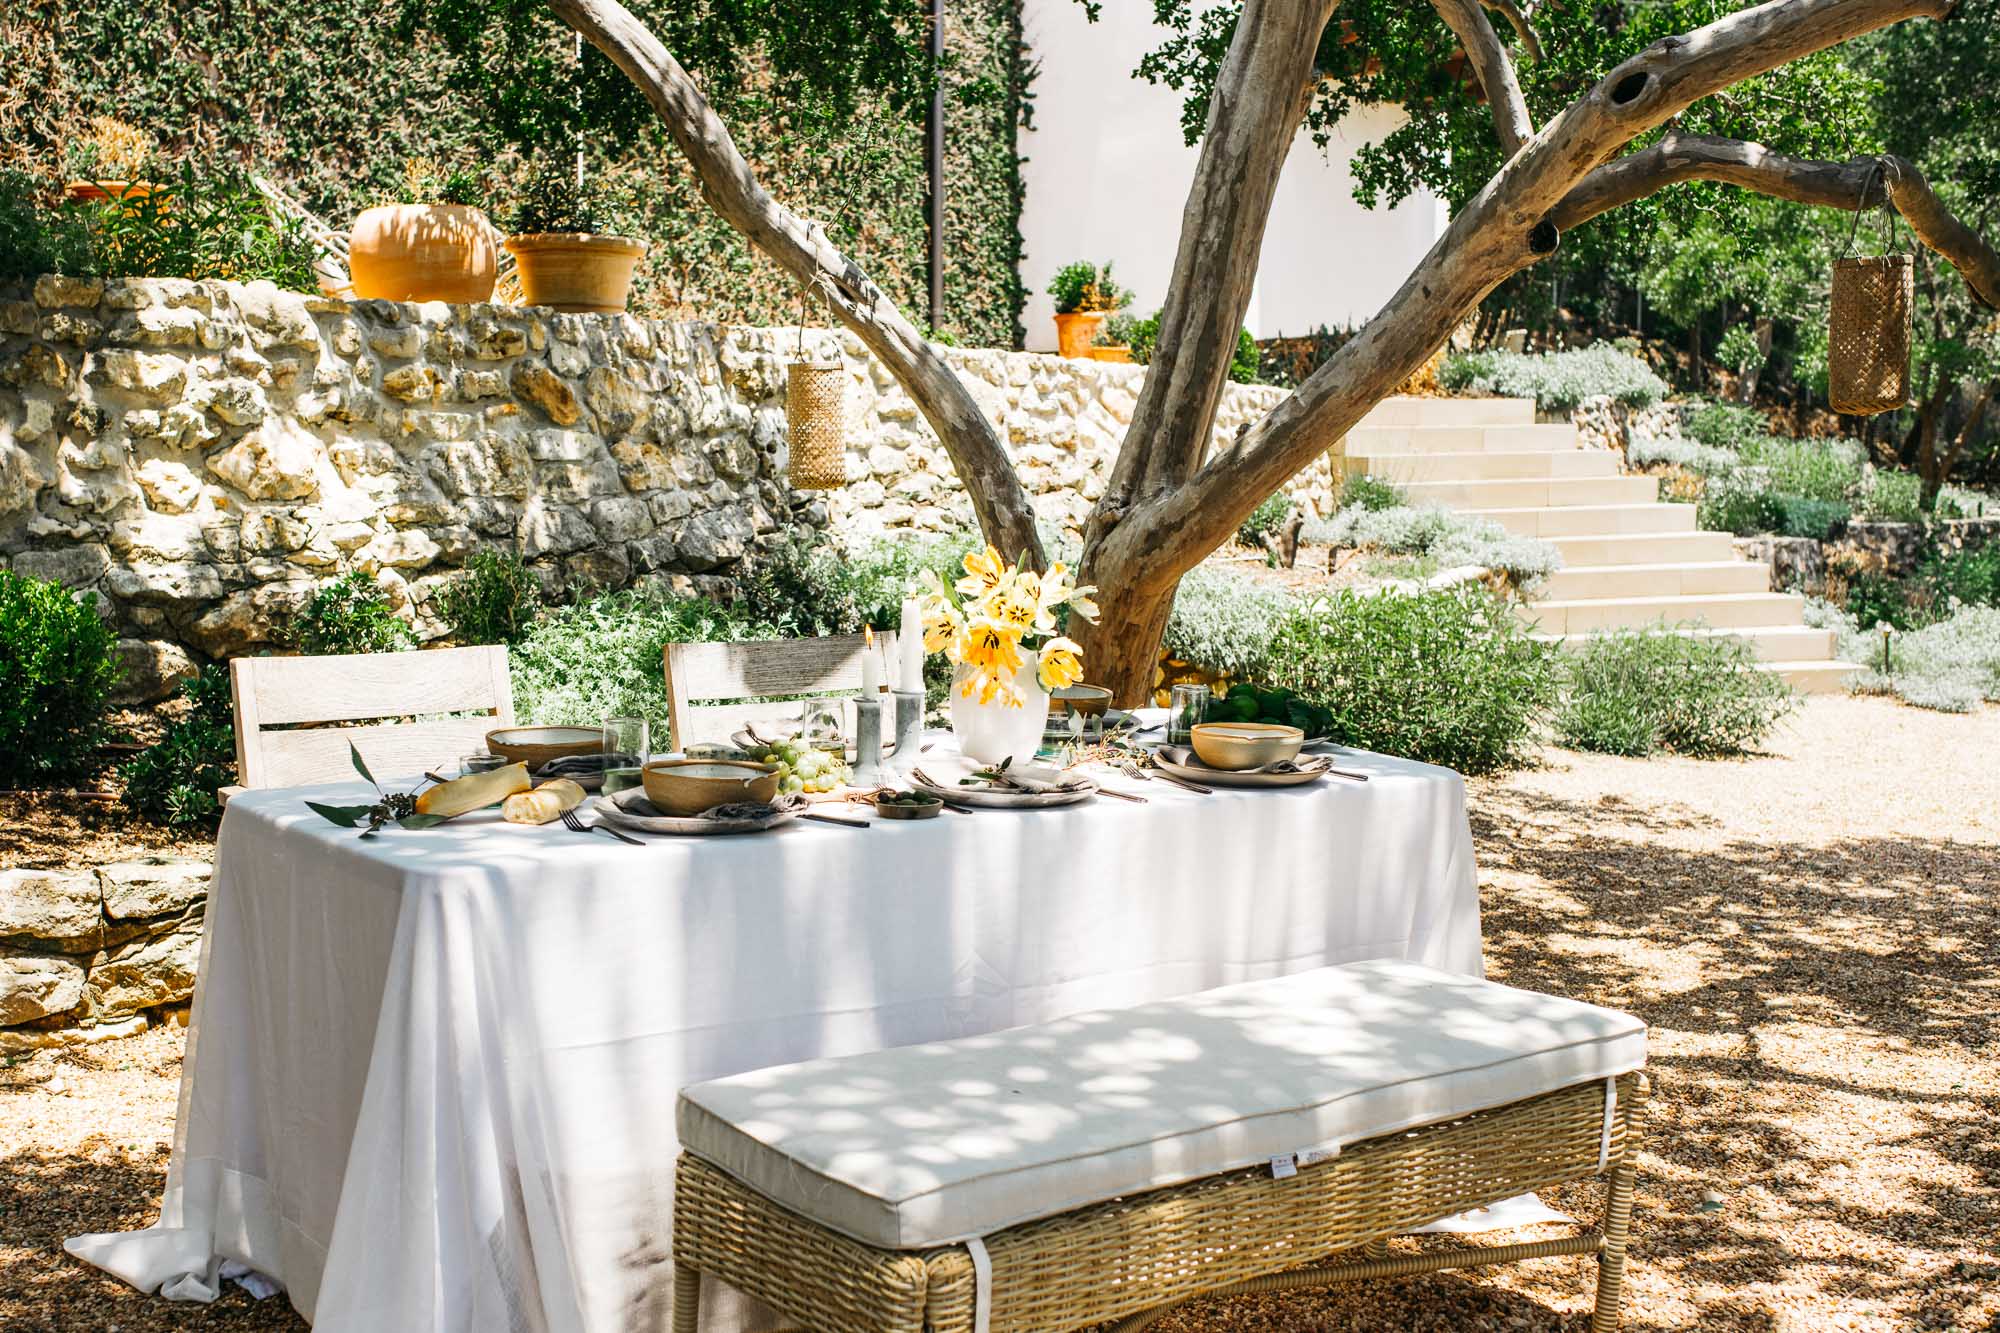 summer table setting ideas, Camille Styles summer dinner party table in backyard with trees